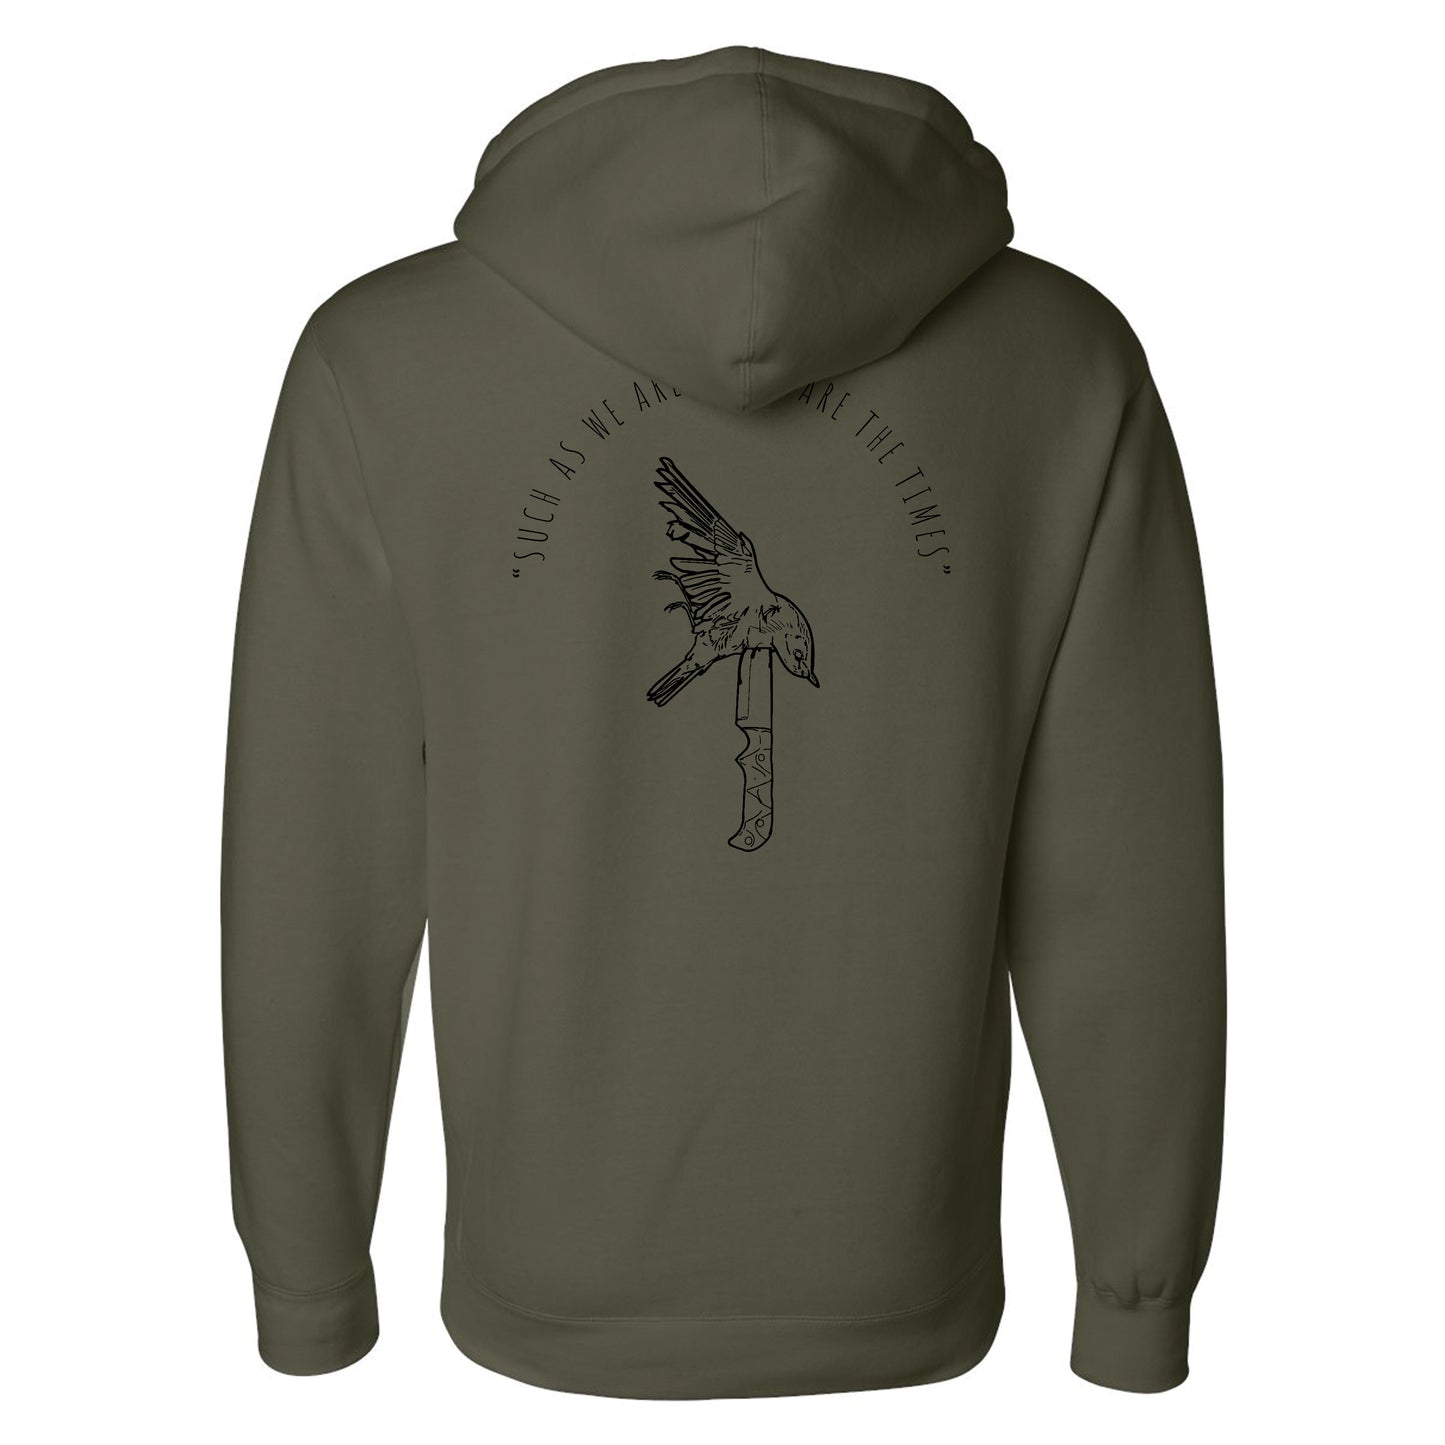 Such Are The Times Hoodie